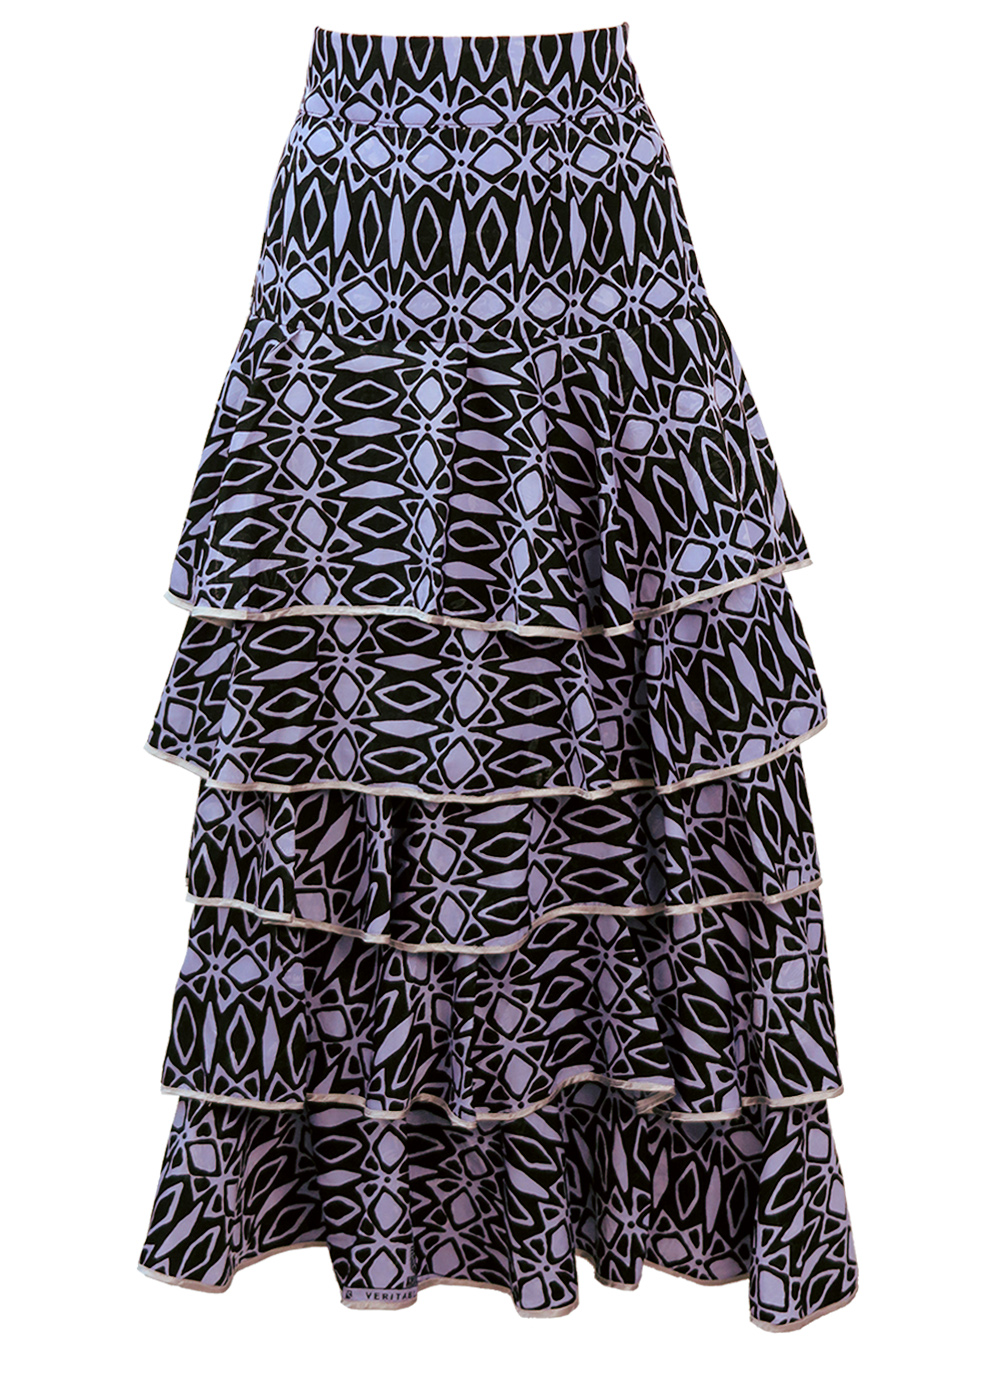 Black & Lilac African Patterned Tiered Maxi Skirt - S | Reign Vintage